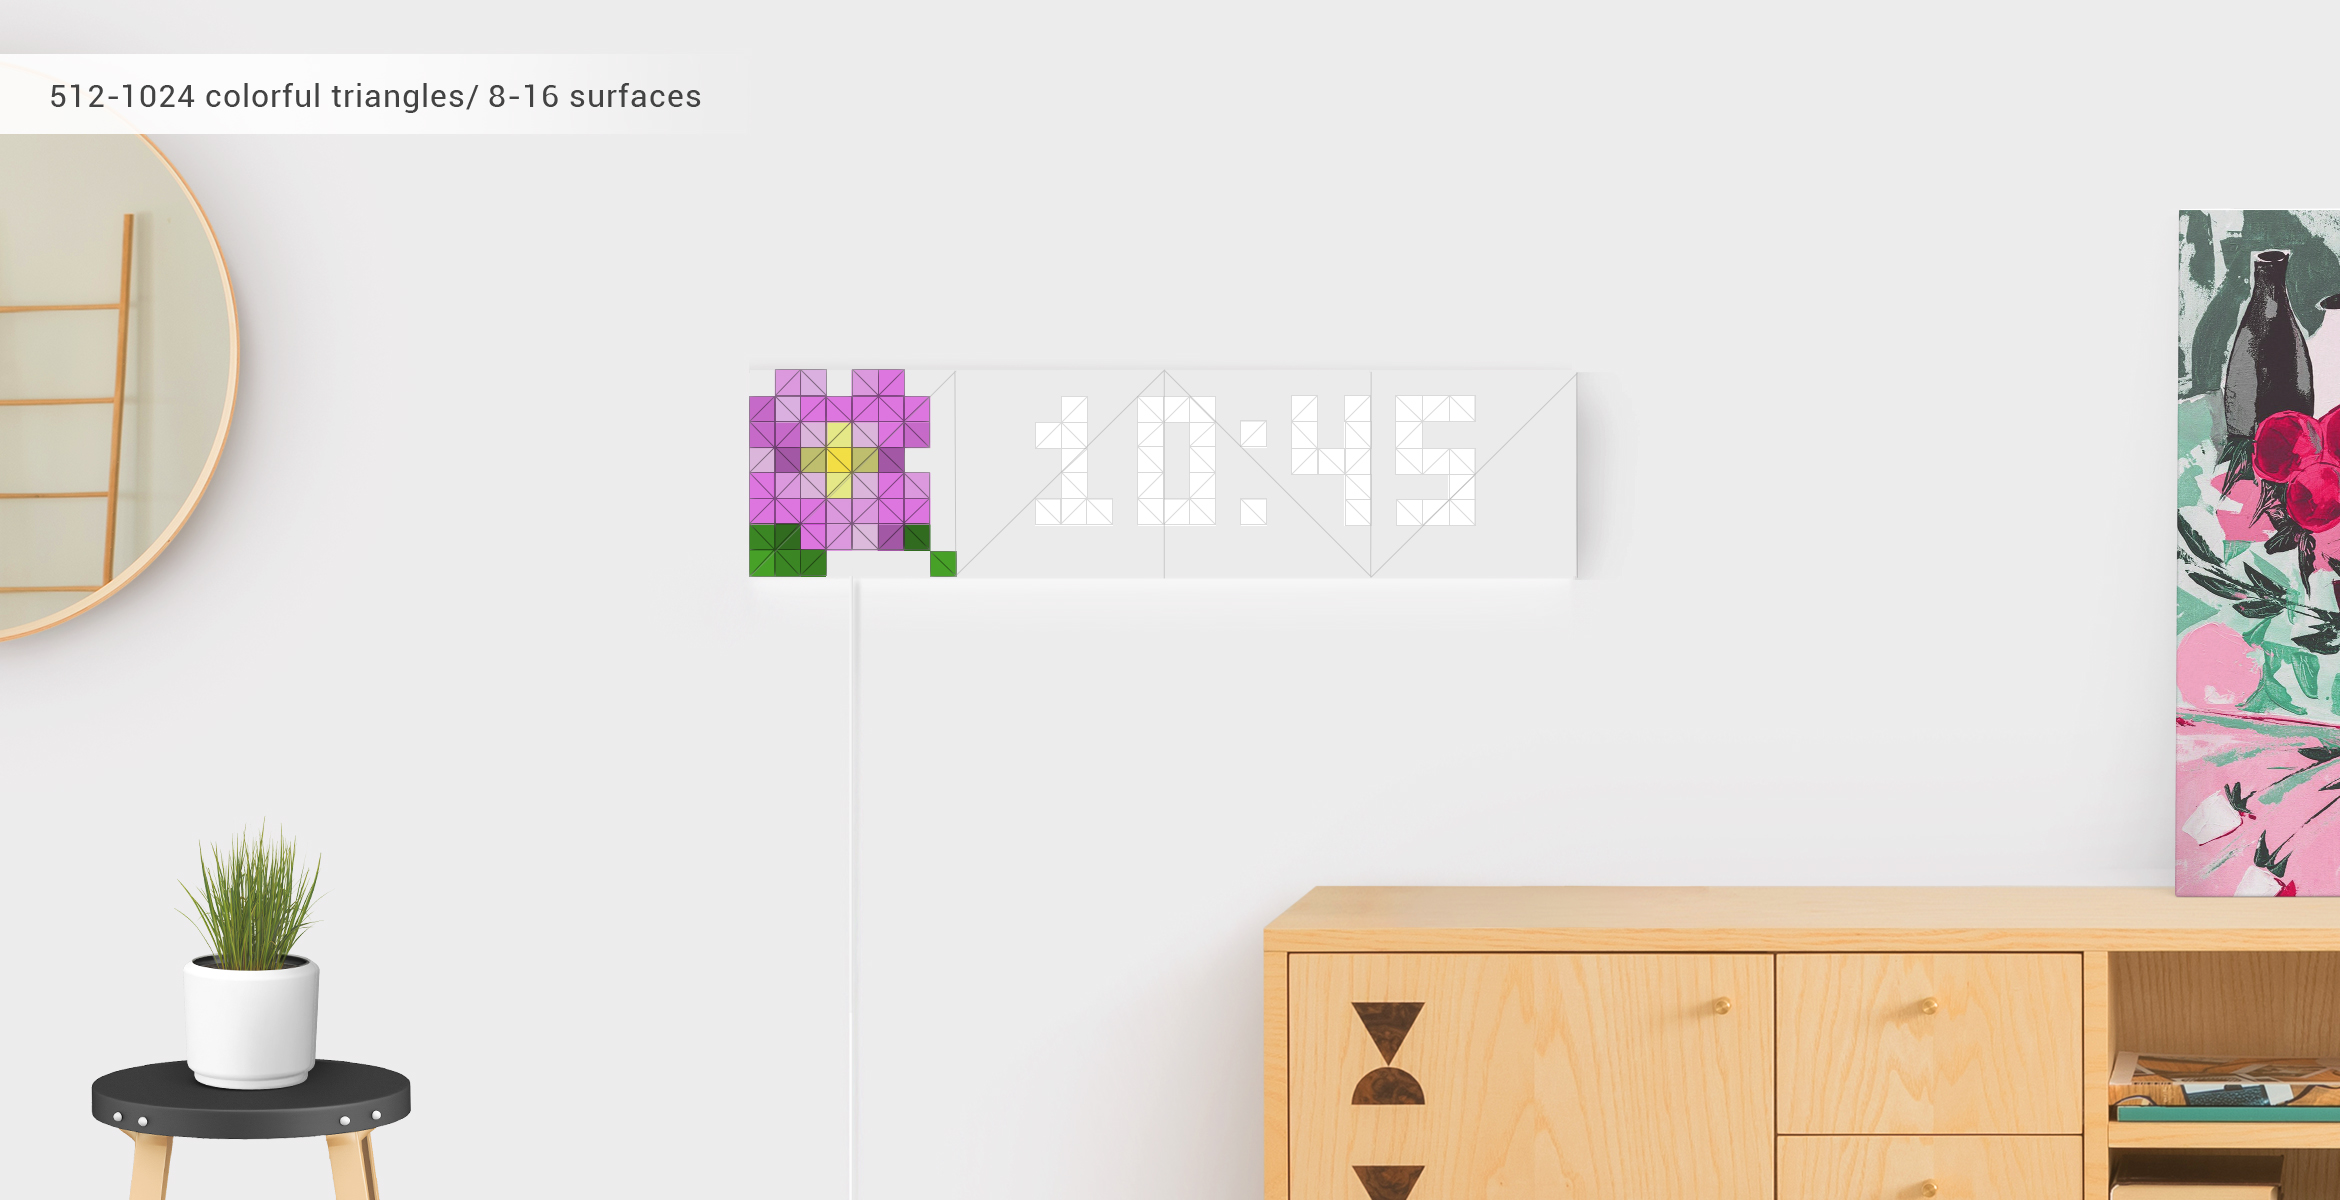 Infoscreen shape, assembled from 8 to 16 LaMetric SKY smart light surfaces, displays time and flower Sky face